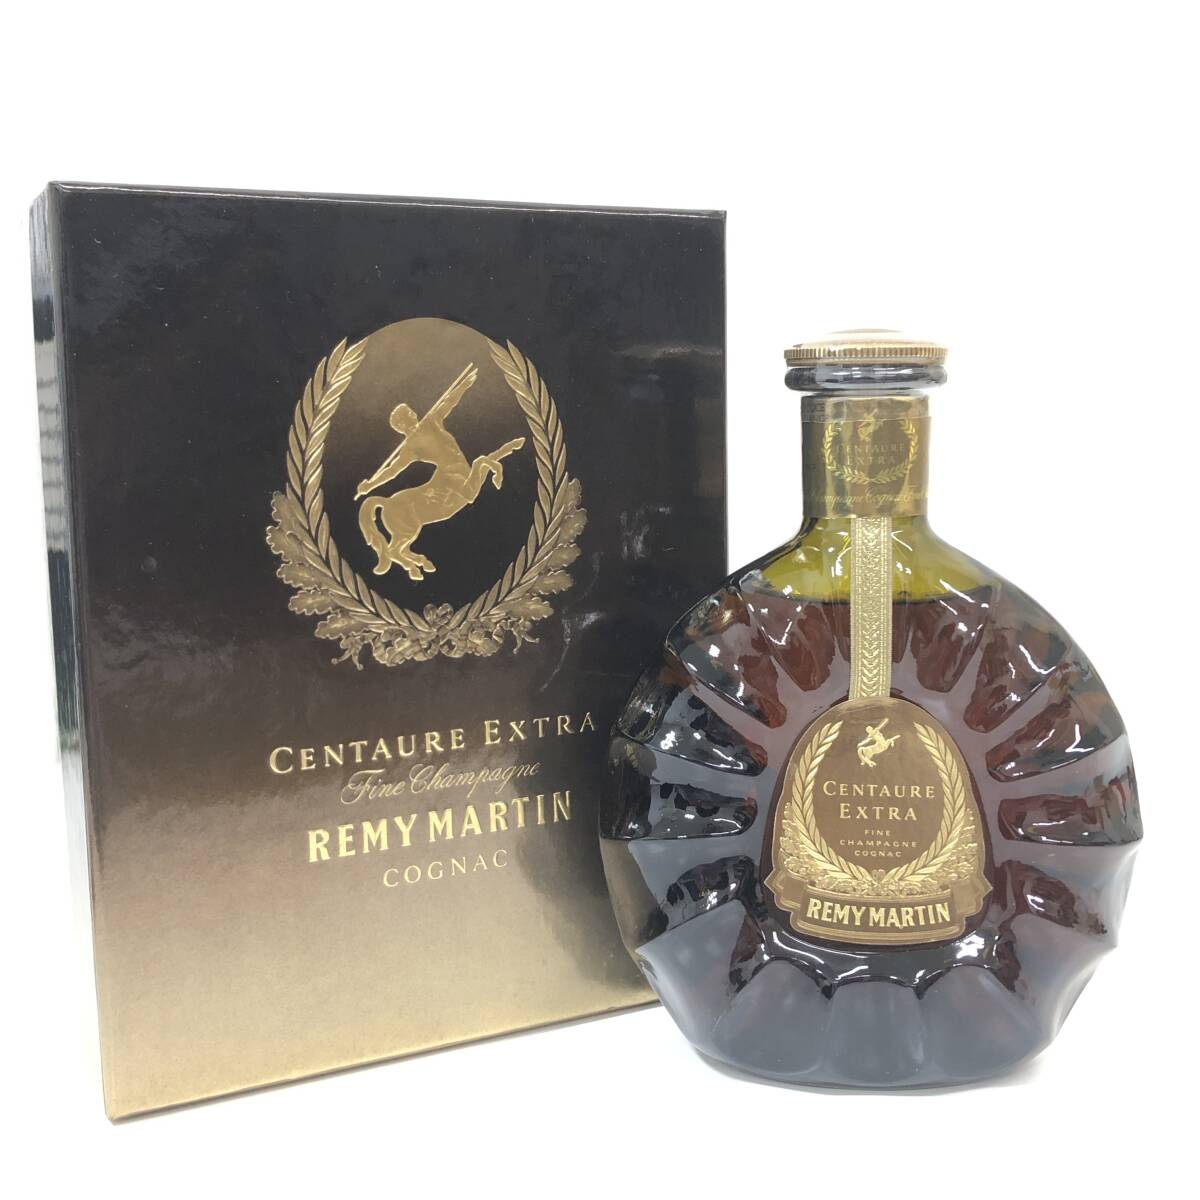 1 jpy ~ not yet . plug REMY MARTIN CENTAURE EXTRA Remy Martin cent - extra cognac 700ml 40% box attaching 